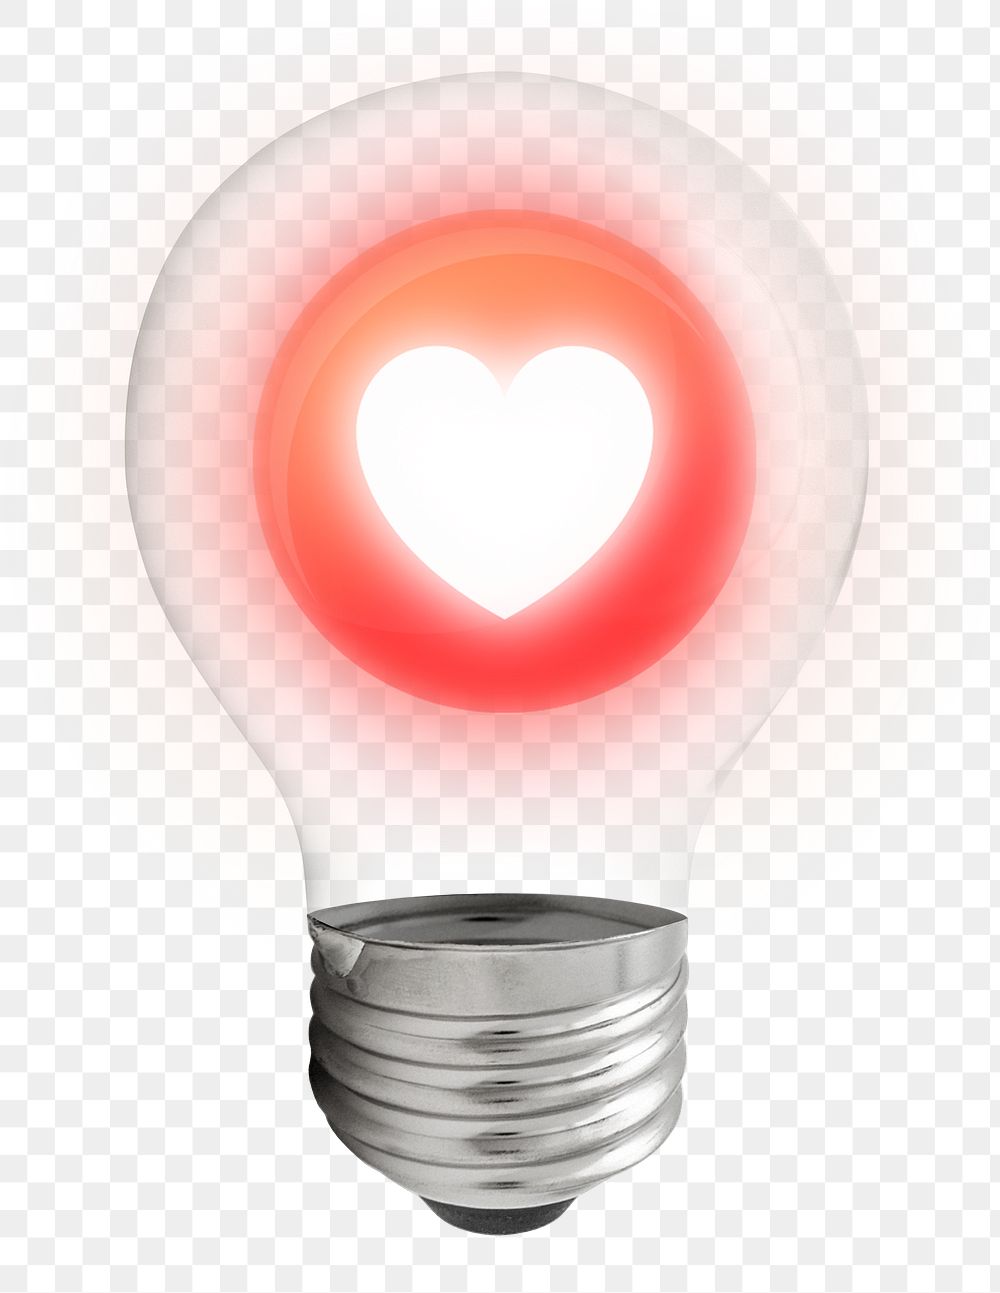 Glowing heart png icon light bulb sticker, like symbol graphic on transparent background